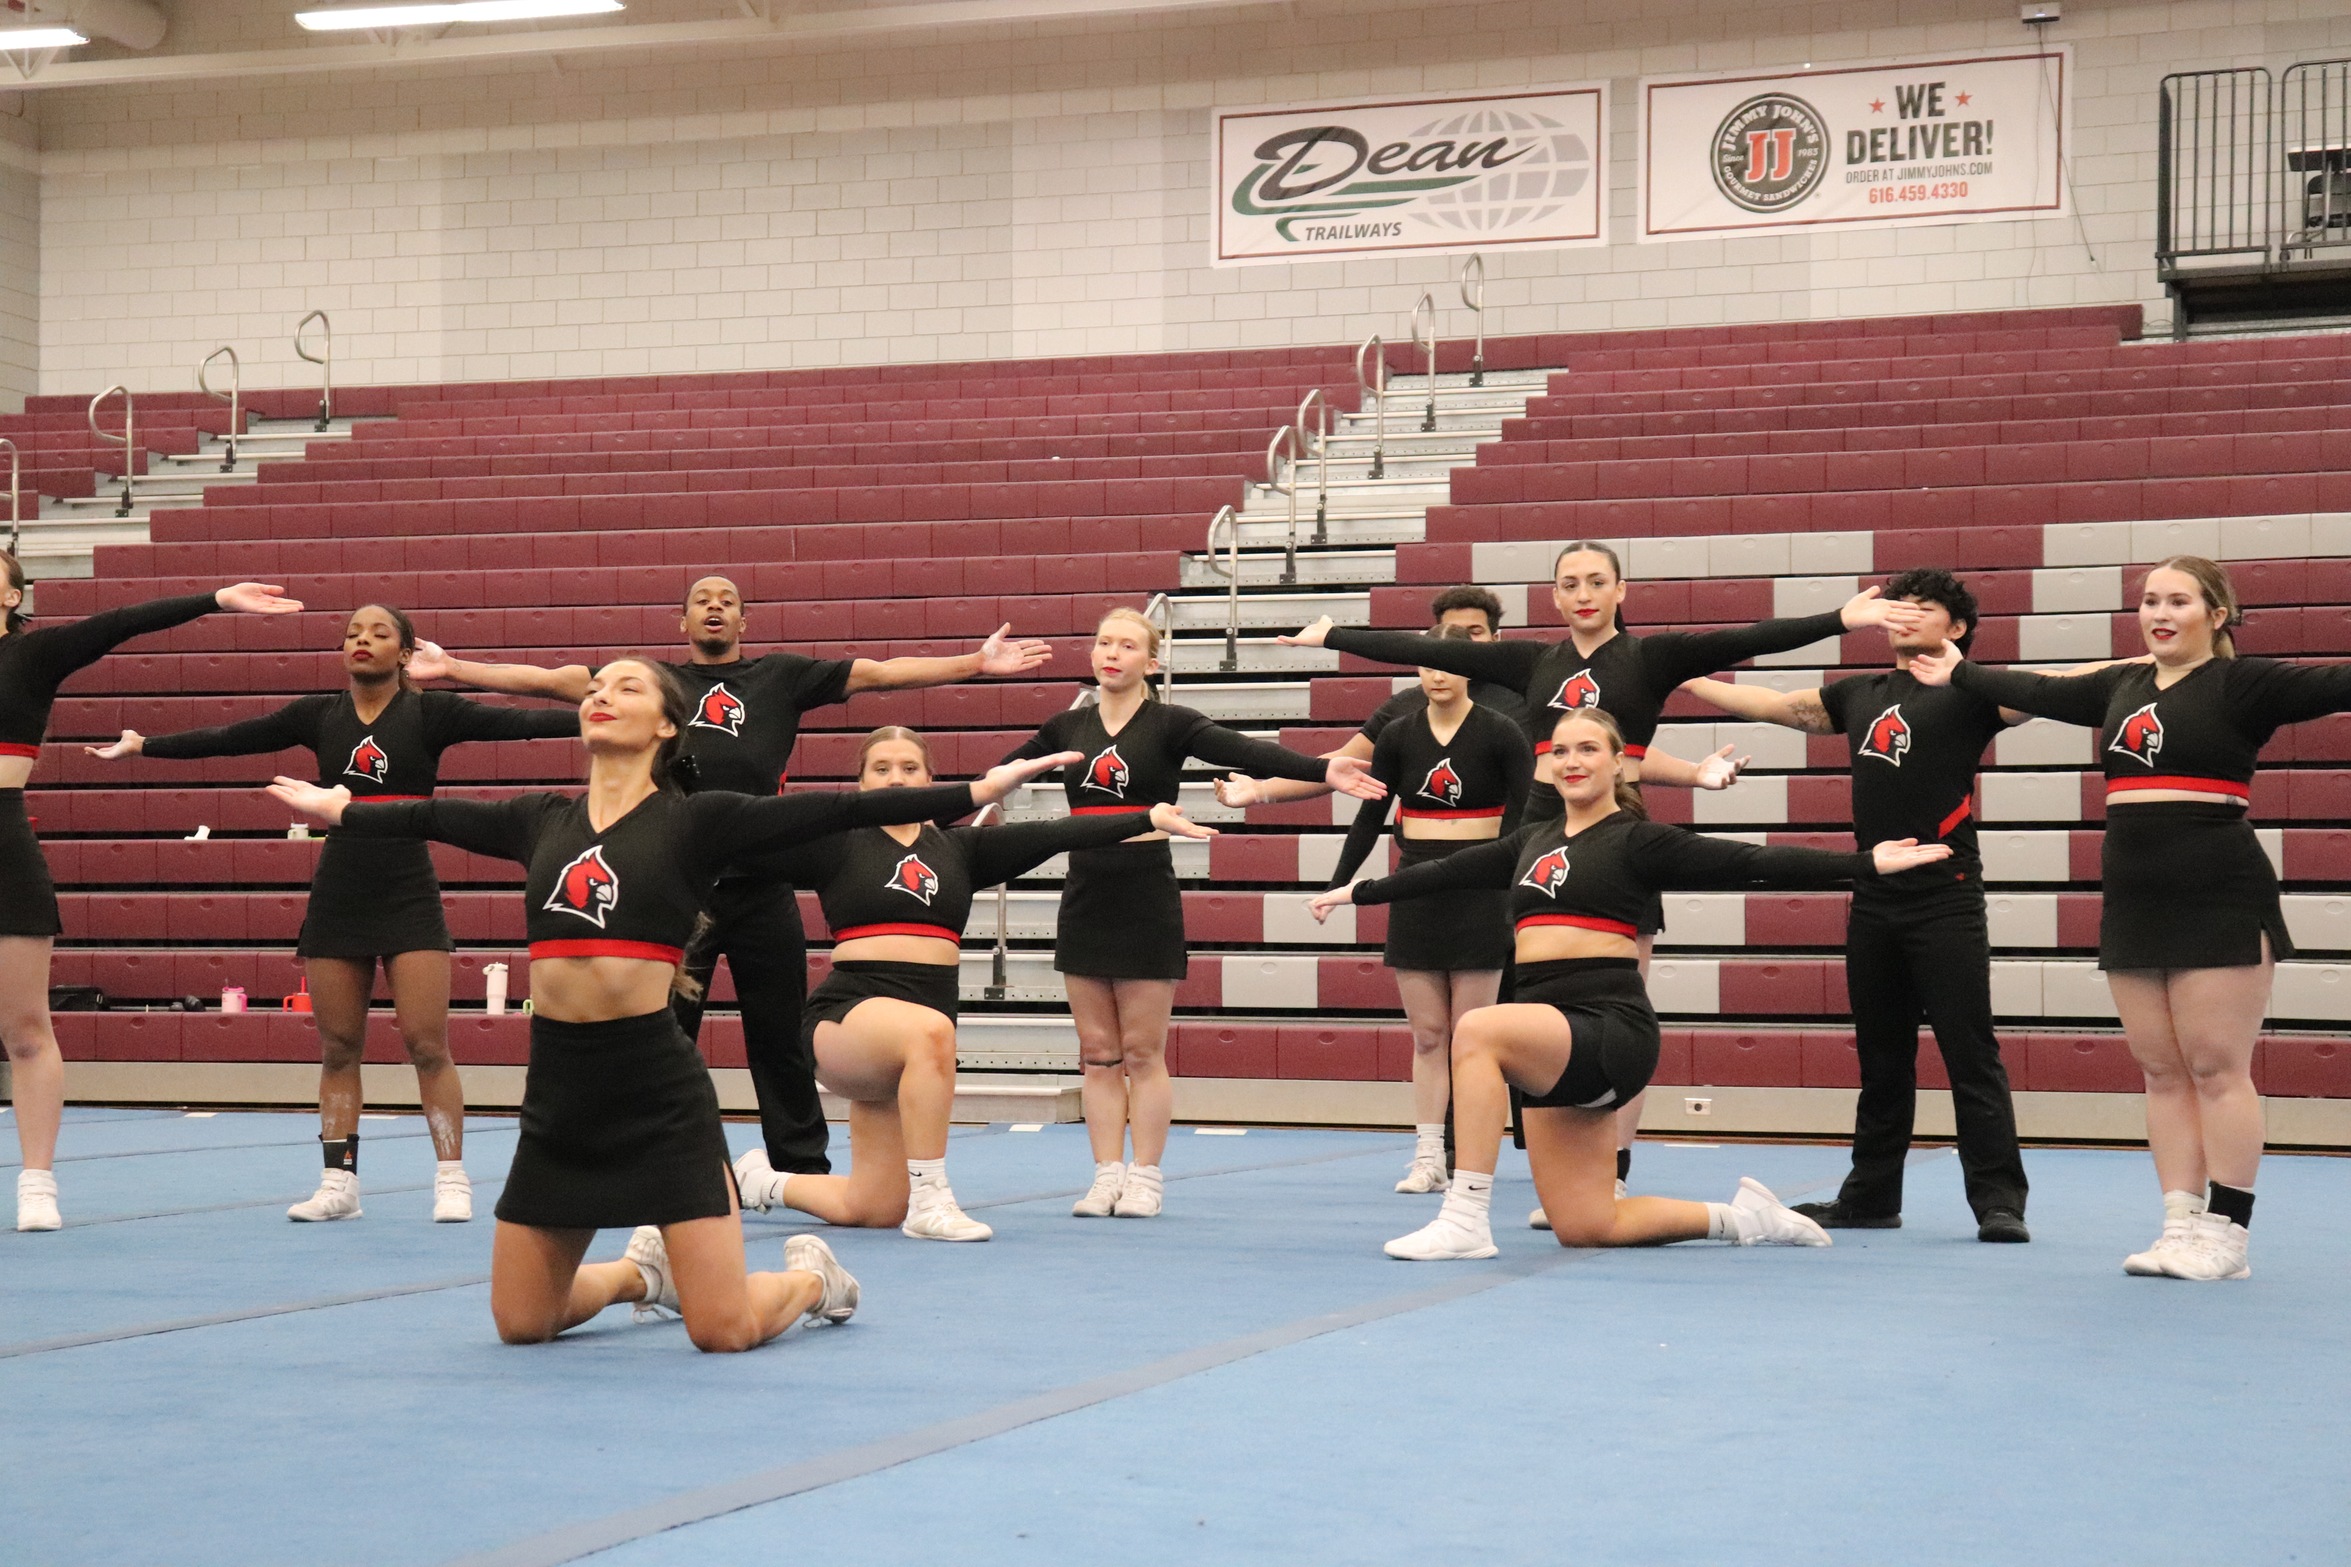 Cheer in fifth after first day of NAIA National Championship